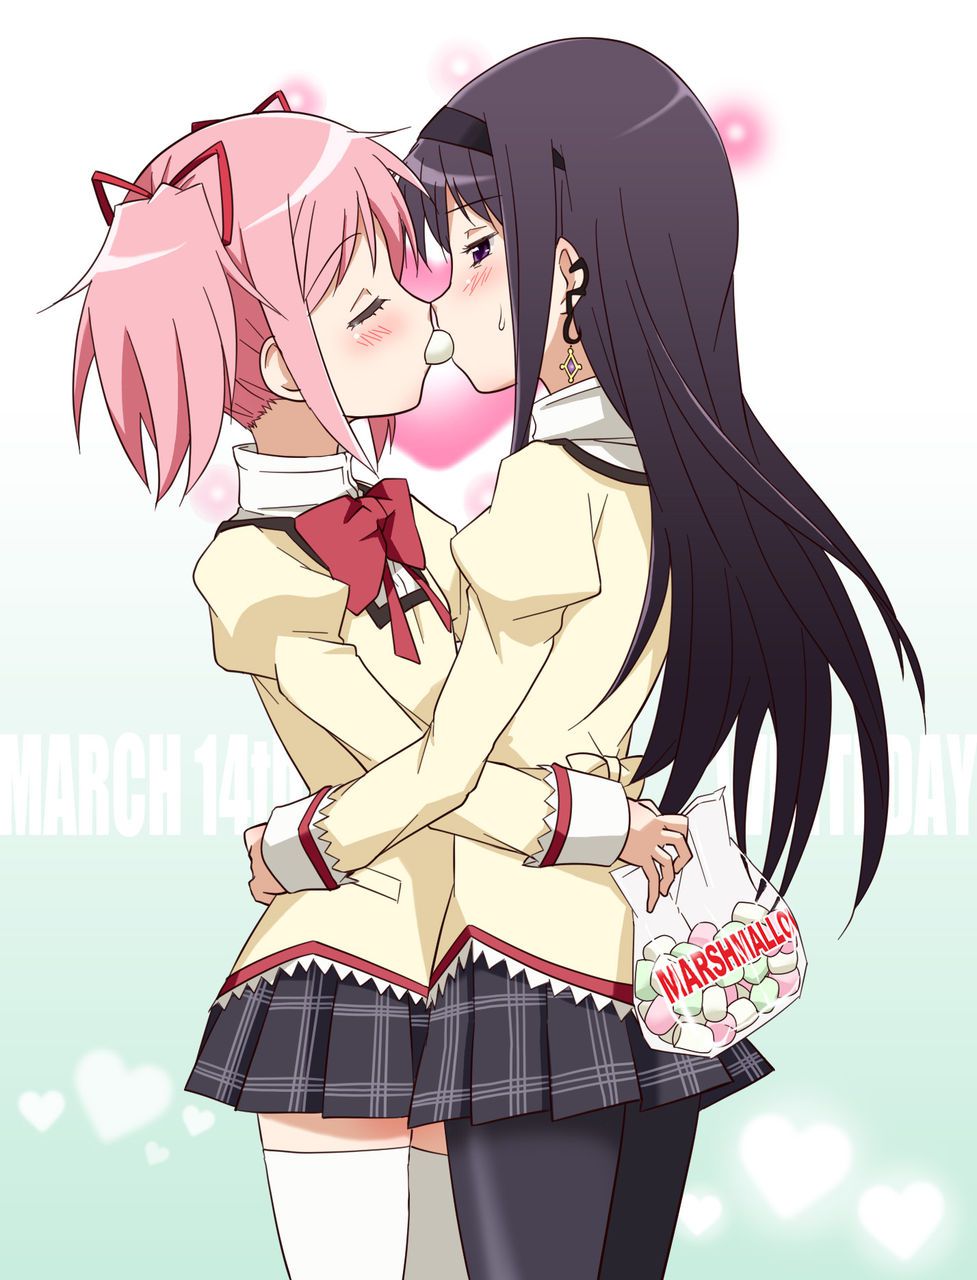 [Yuri] Flirting lesbian erotic image of a girl with each other 3 [2-d] 23